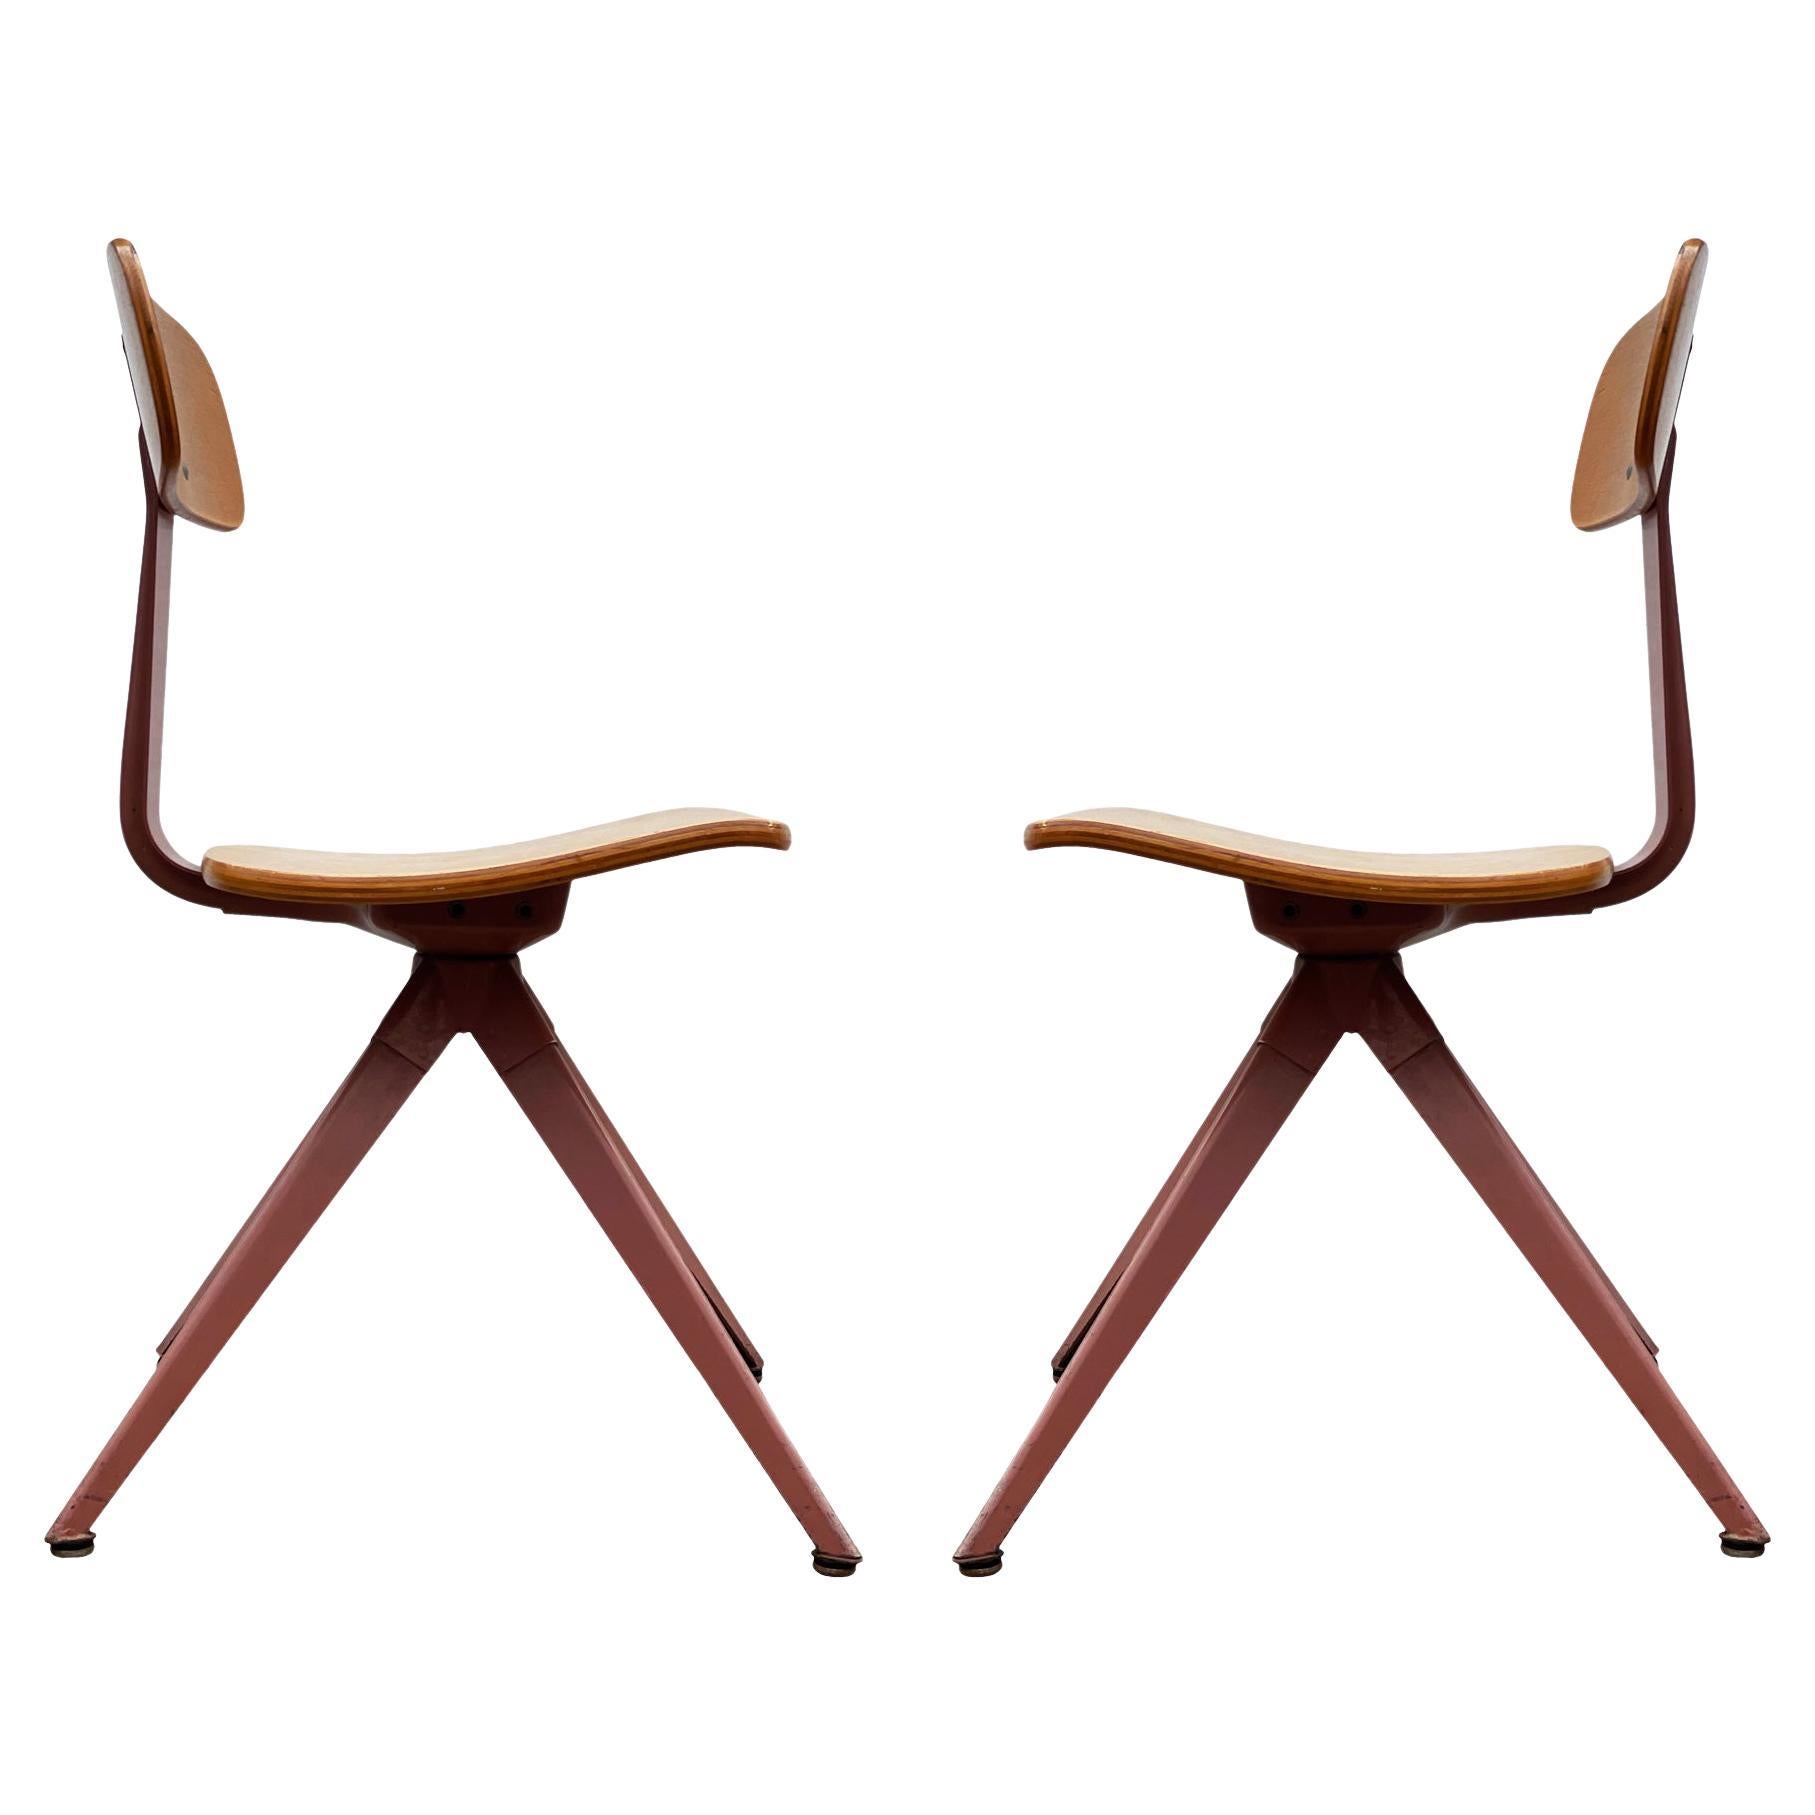 Matching Pair of Mid Century Industrial Modern Steel & Bent Wood Side Chairs For Sale